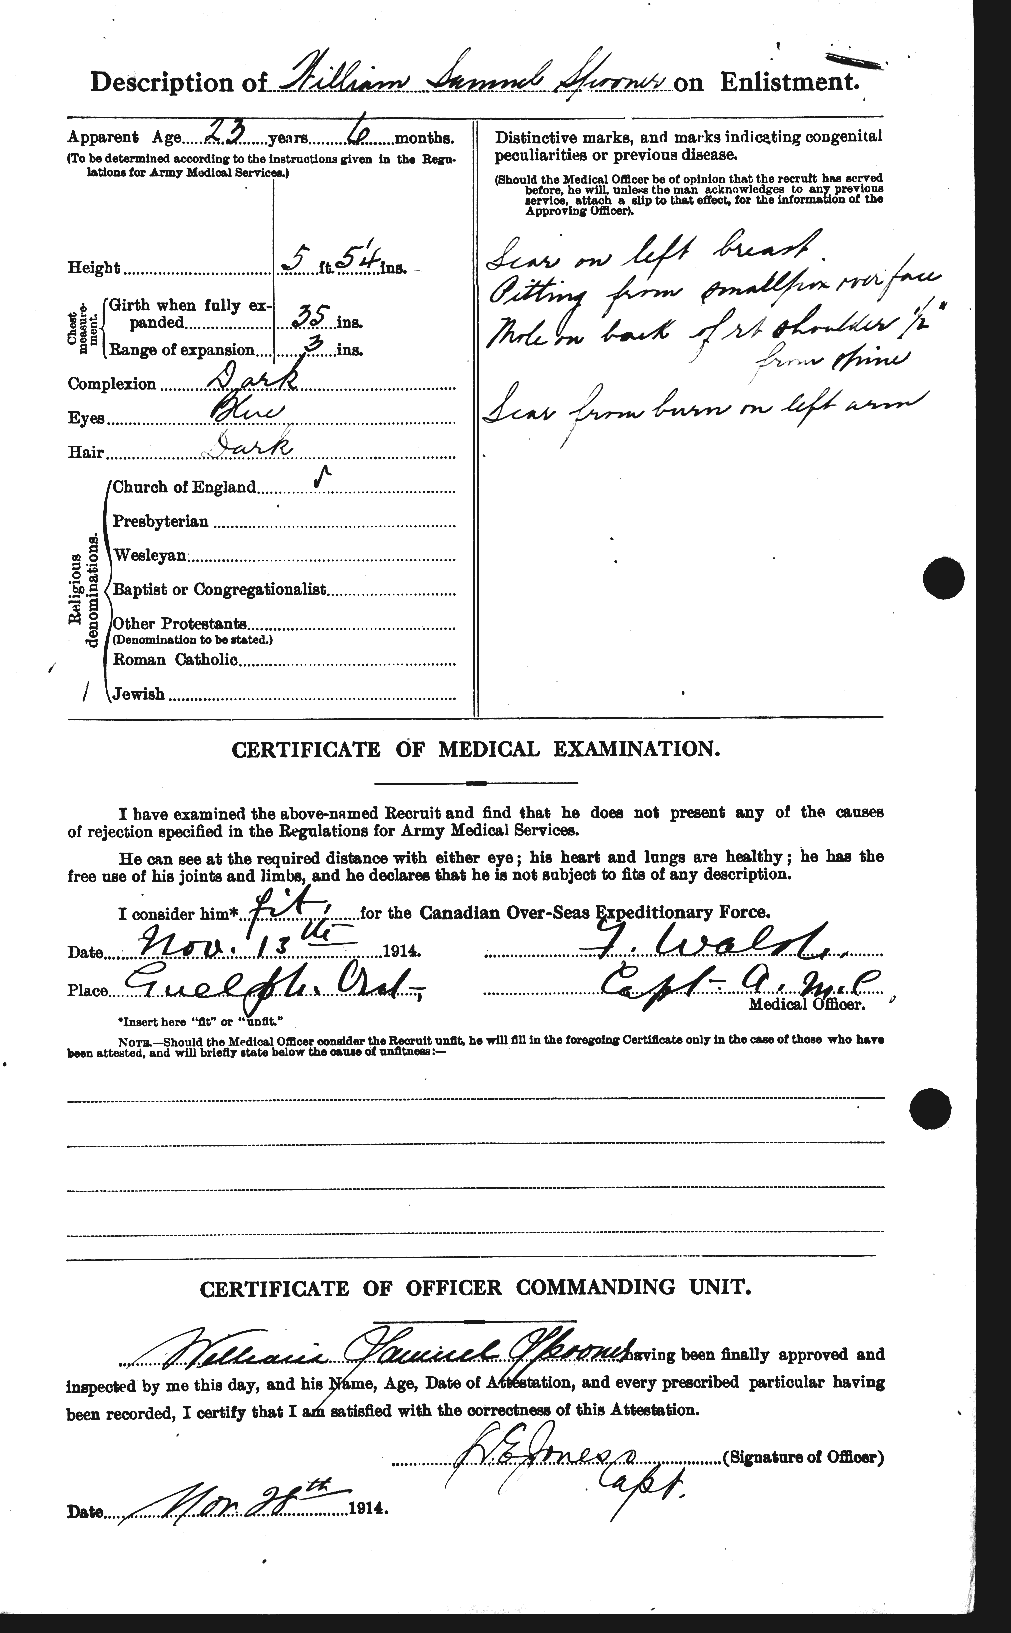 Personnel Records of the First World War - CEF 113229b